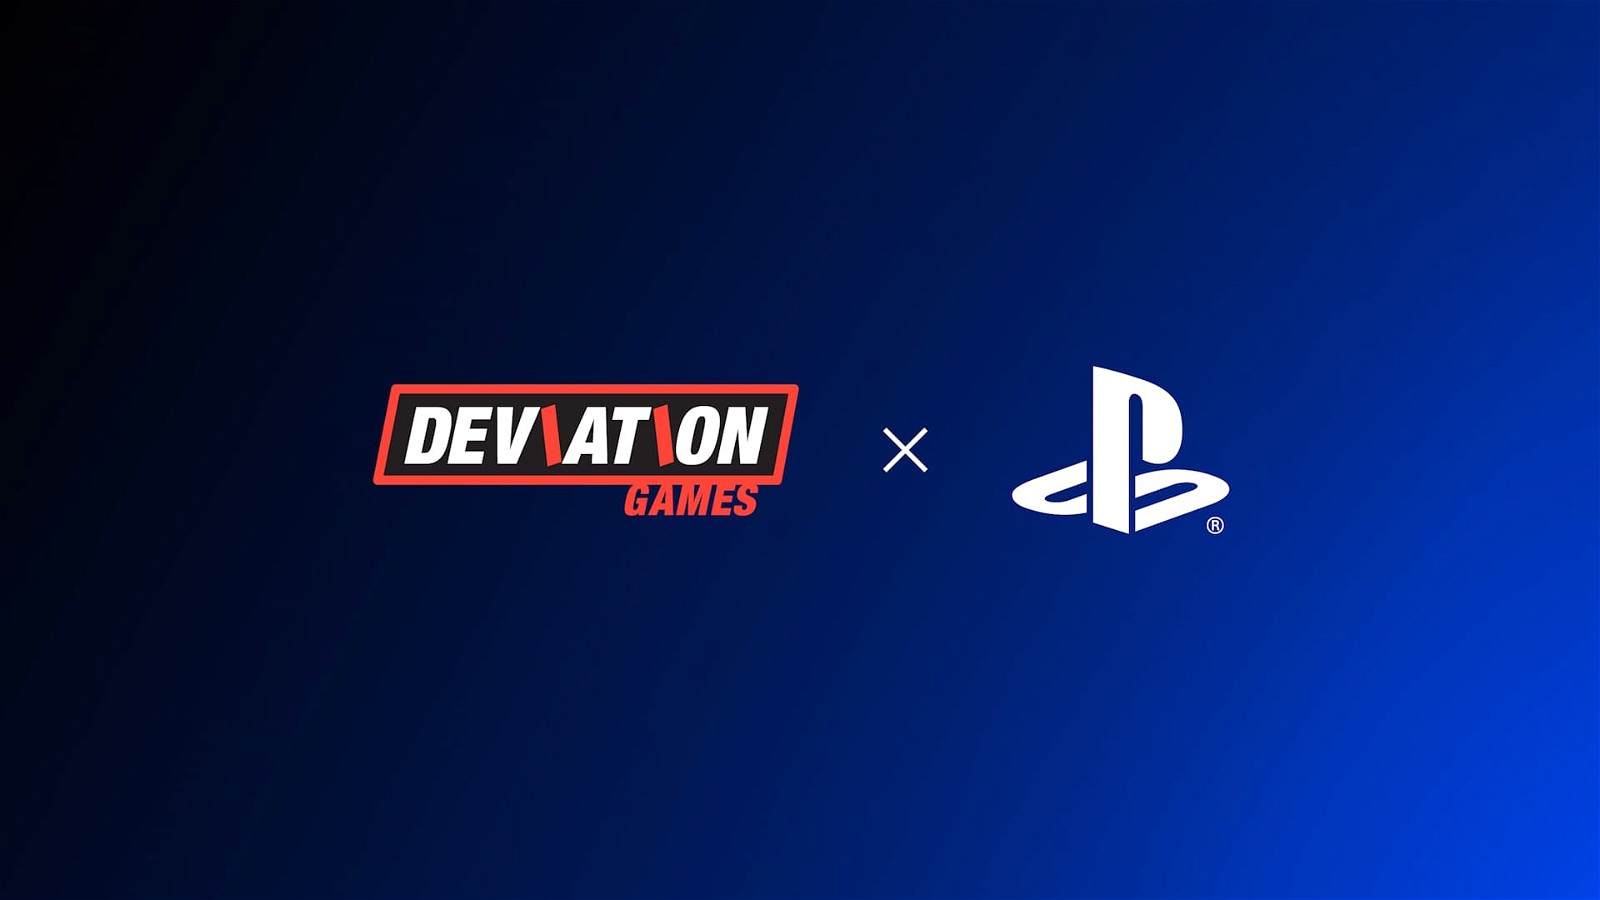 Deviation Games and their PlayStation partnership was announced less than three years ago. Image credit: Deviation Games